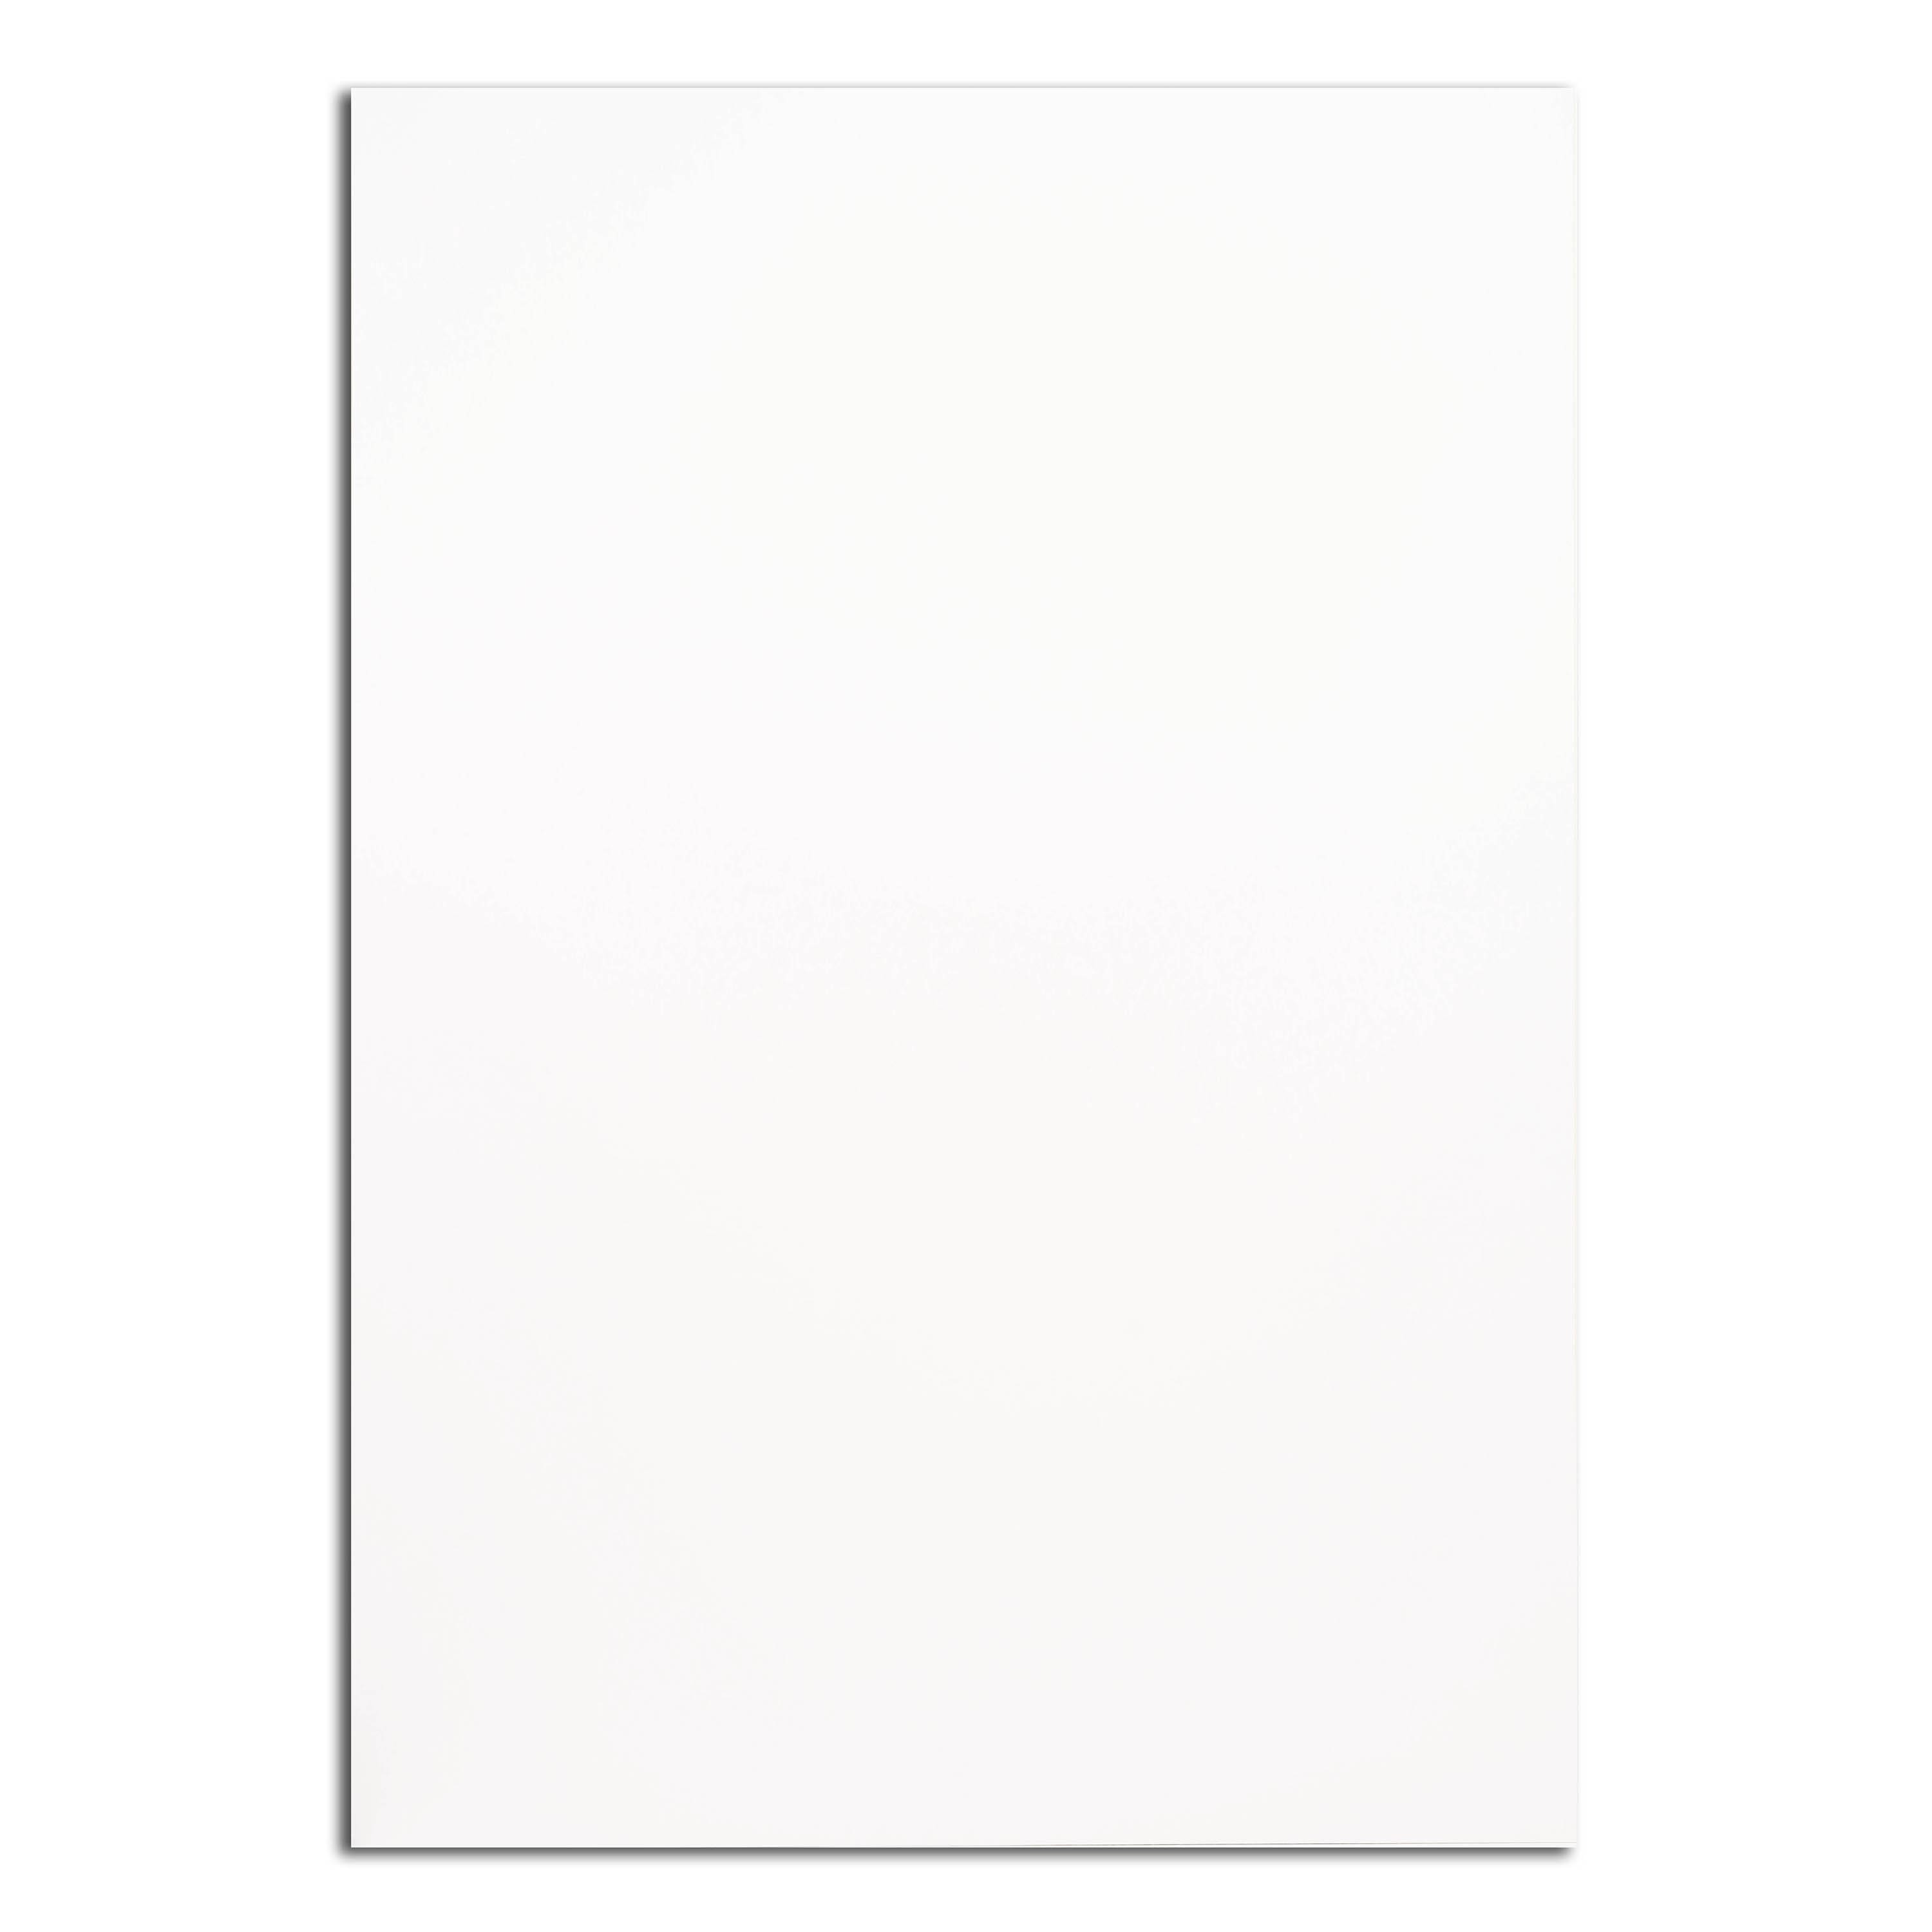  Mat Board Center, 16x20 Uncut Mat Boards - Full Sheet - for  Art, Prints, Photos, Prints and More (Mixed Color, 20-Pack) : Arts, Crafts  & Sewing